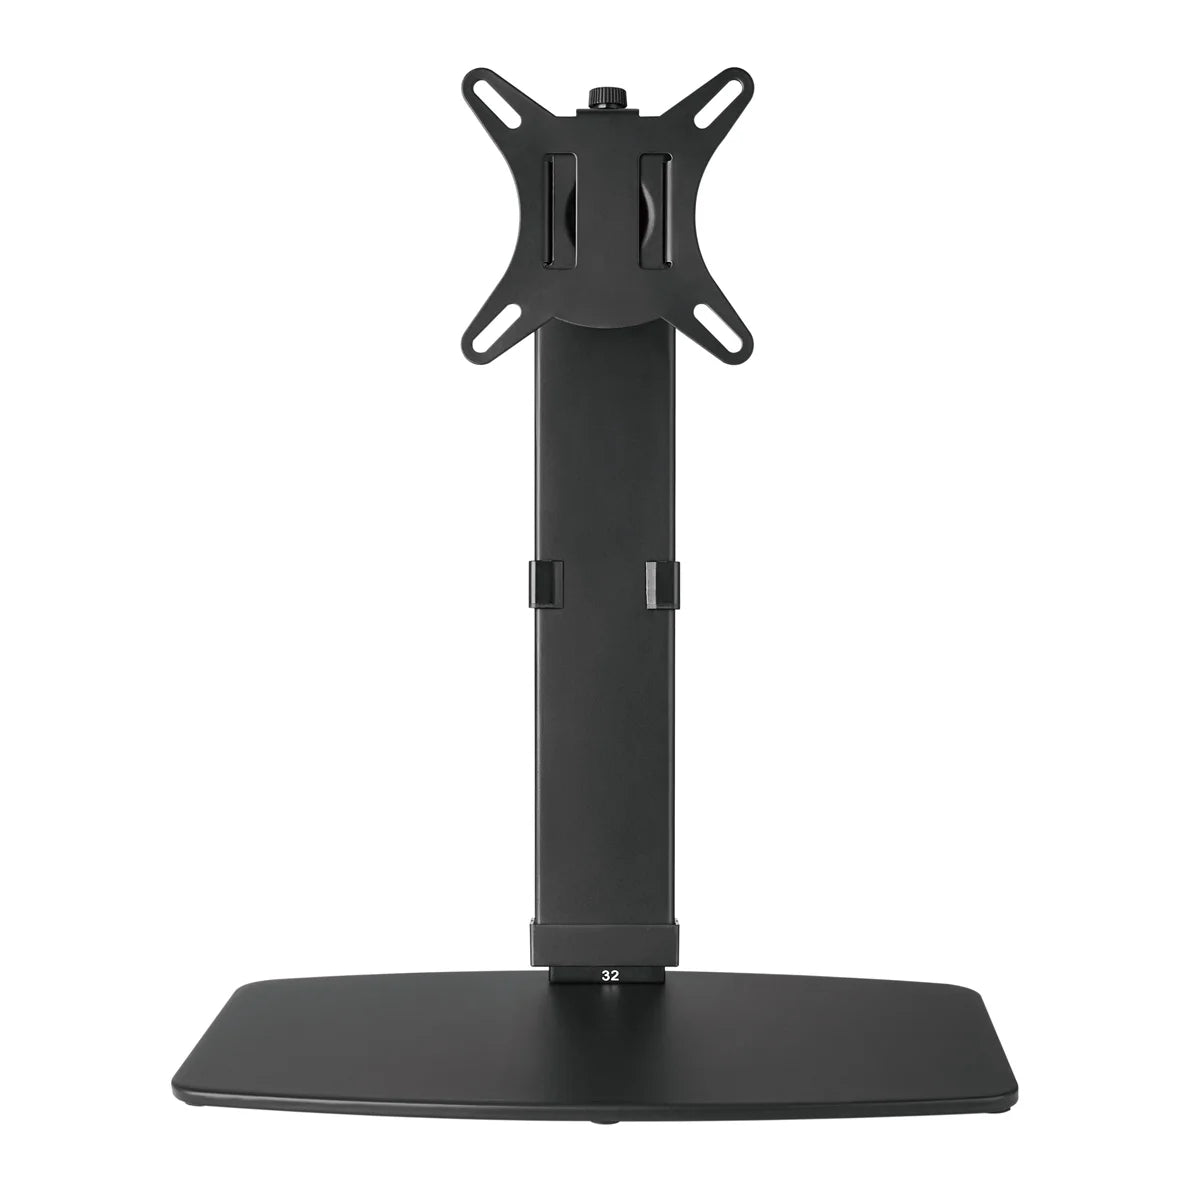 SkillTech - SH 67 T01 - Free-Standing Vertical Lift Steel Monitor Mount Stand